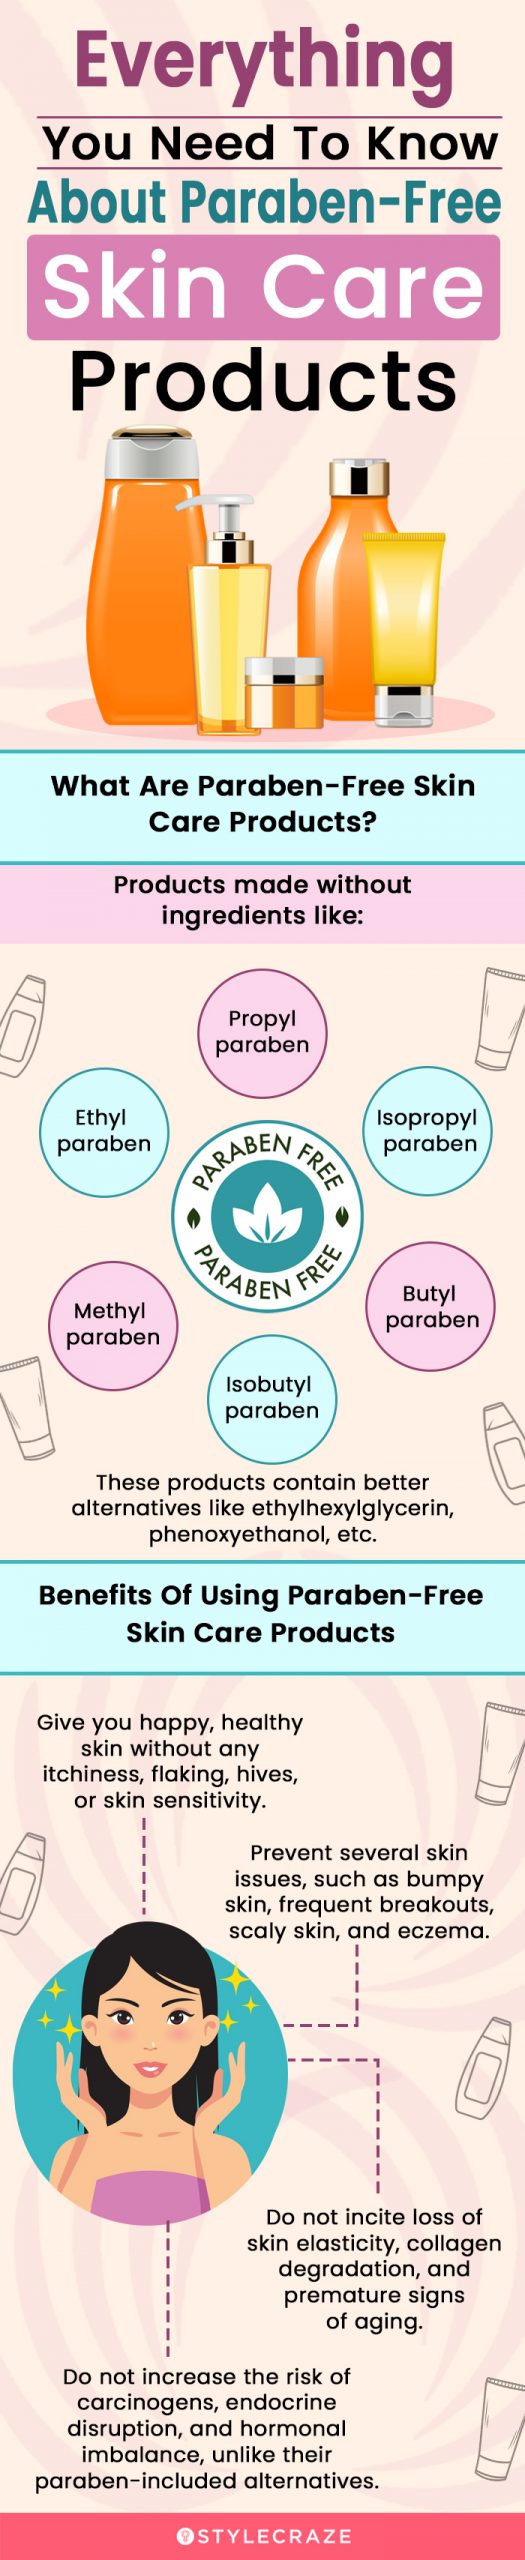 Everything You Need To Know About Paraben-Free Skin Care Products [infographic]